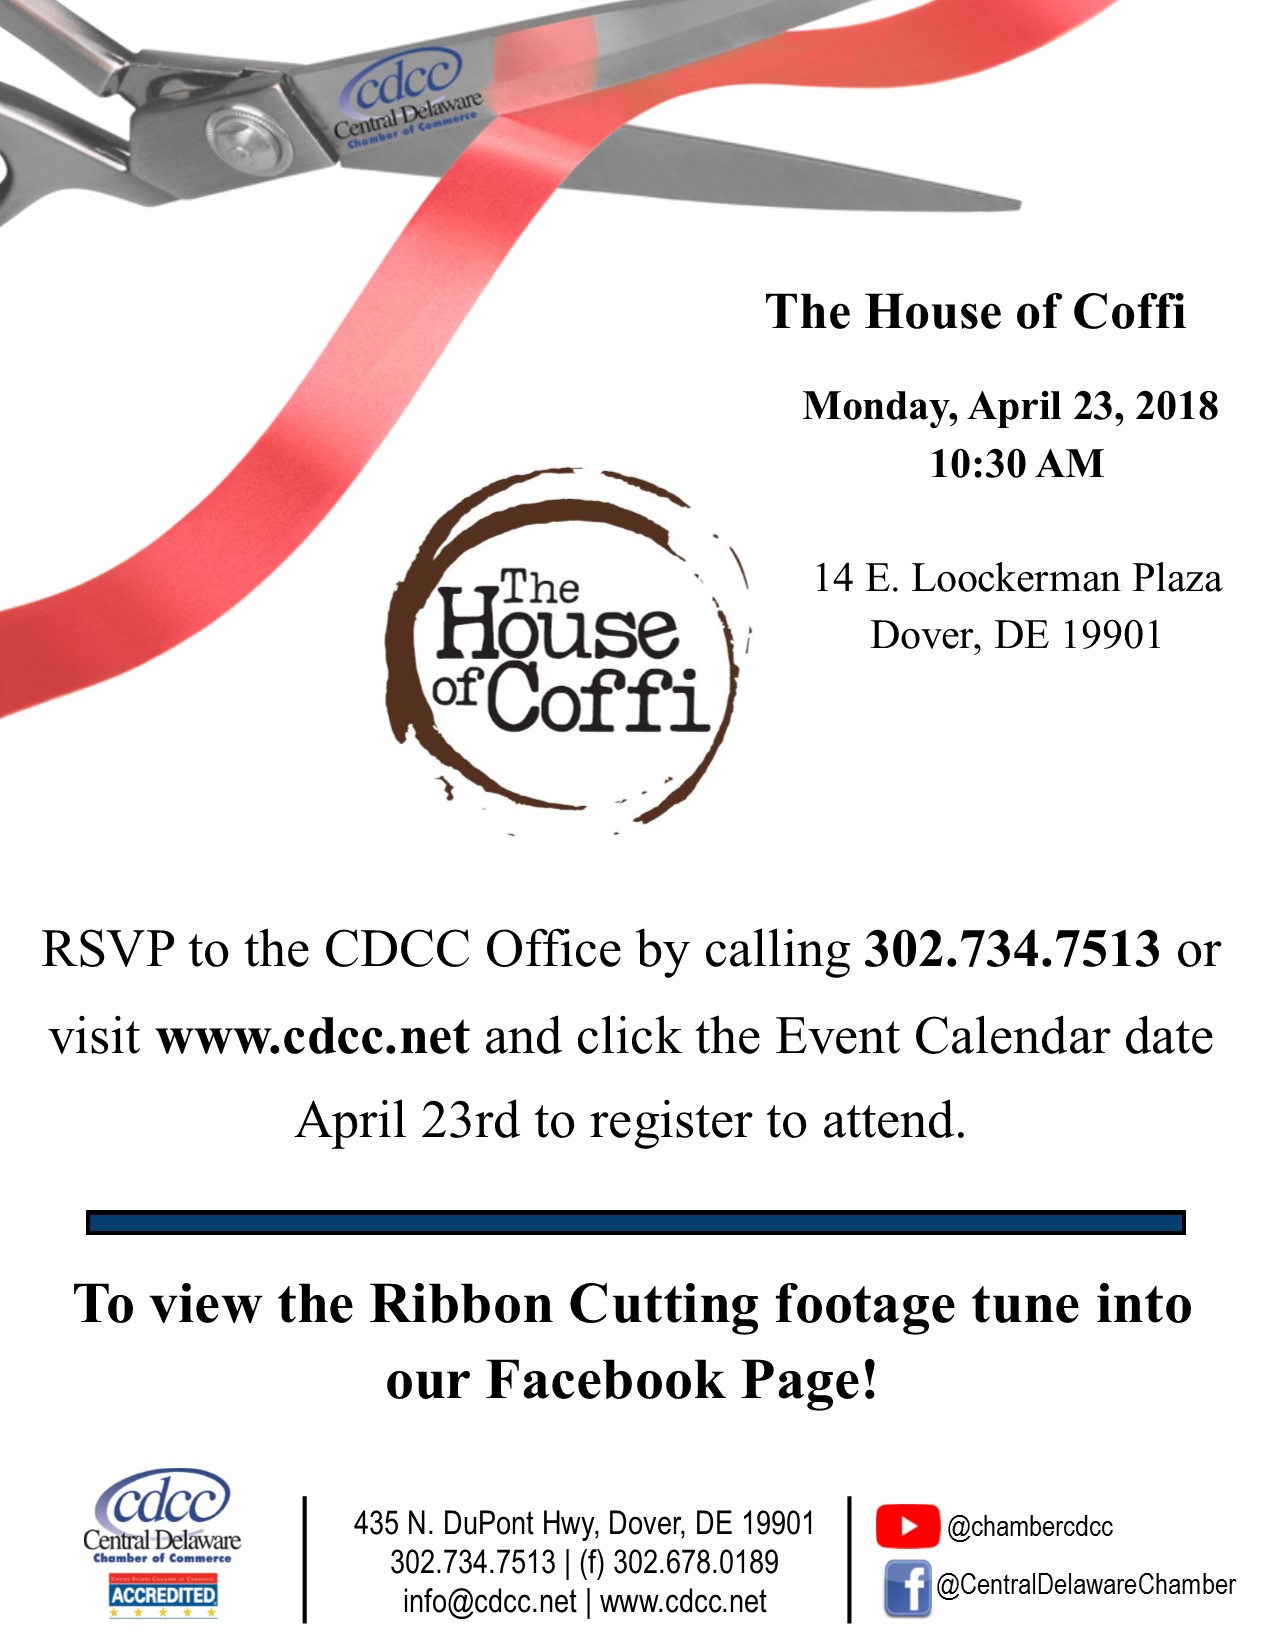 Ribbon Cutting - The House of Coffi